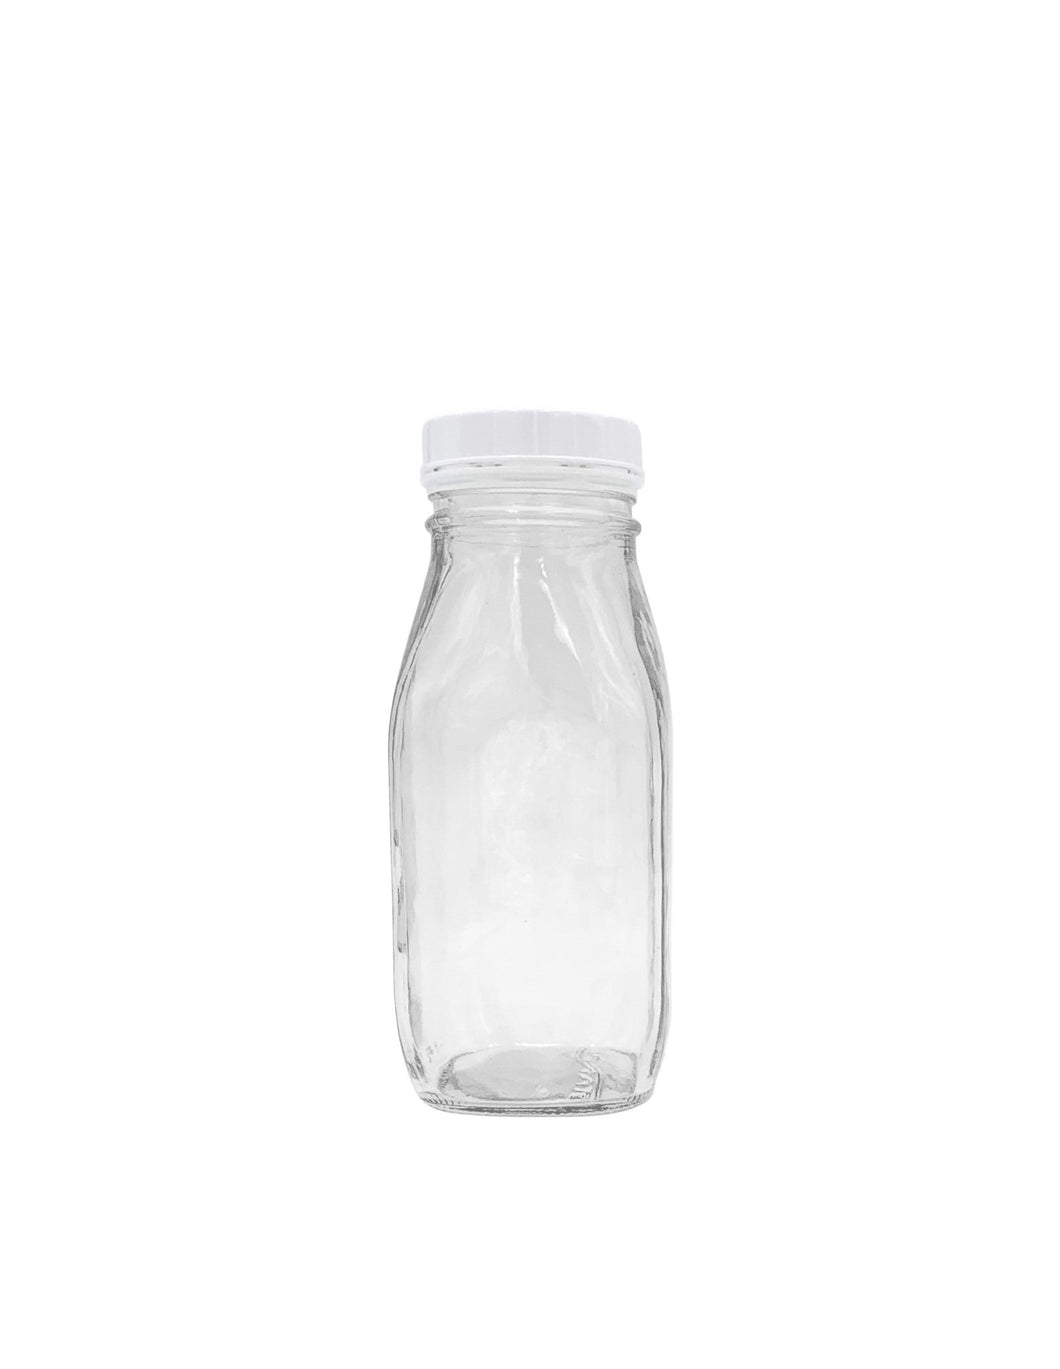 12 Oz Glass Water Bottle Virtually Unbreakable with Thick Sides and Screw-on Cap -- Case of 24 - Better Beverage Bottles